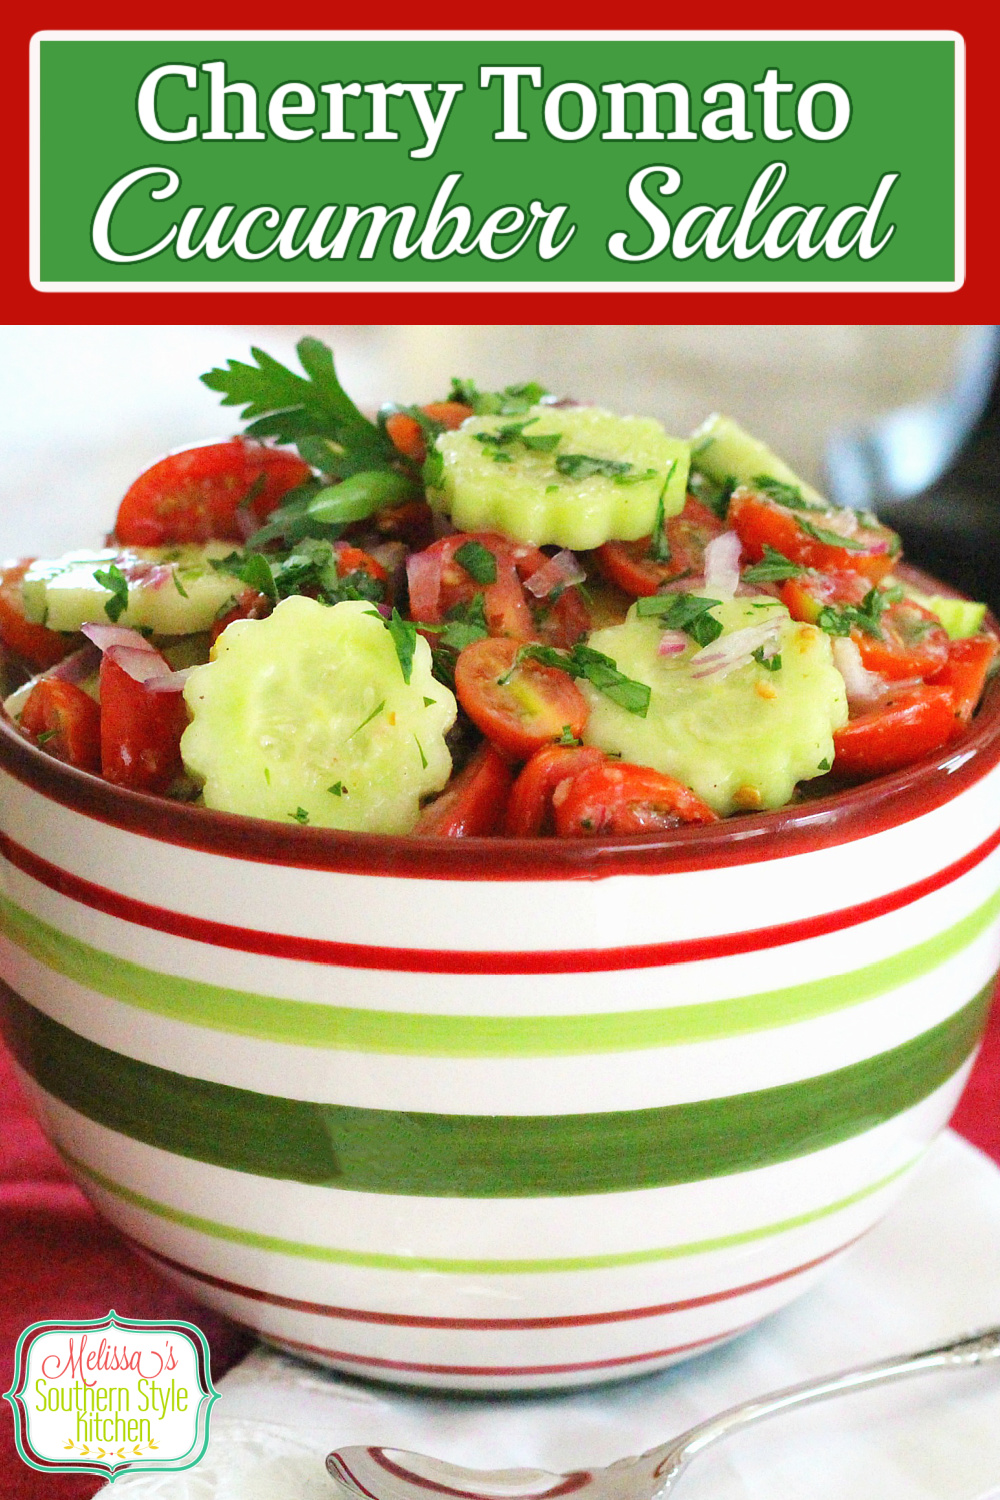 Sweet cherry tomatoes and cucumbers shine in this simple and delicious fresh salad #tomatocucumbersalad #tomatoes #cucumbers #salads #easysaladrecipes #food #sidedishrecipes #southernfood #southernecipes #cherrytomatoes